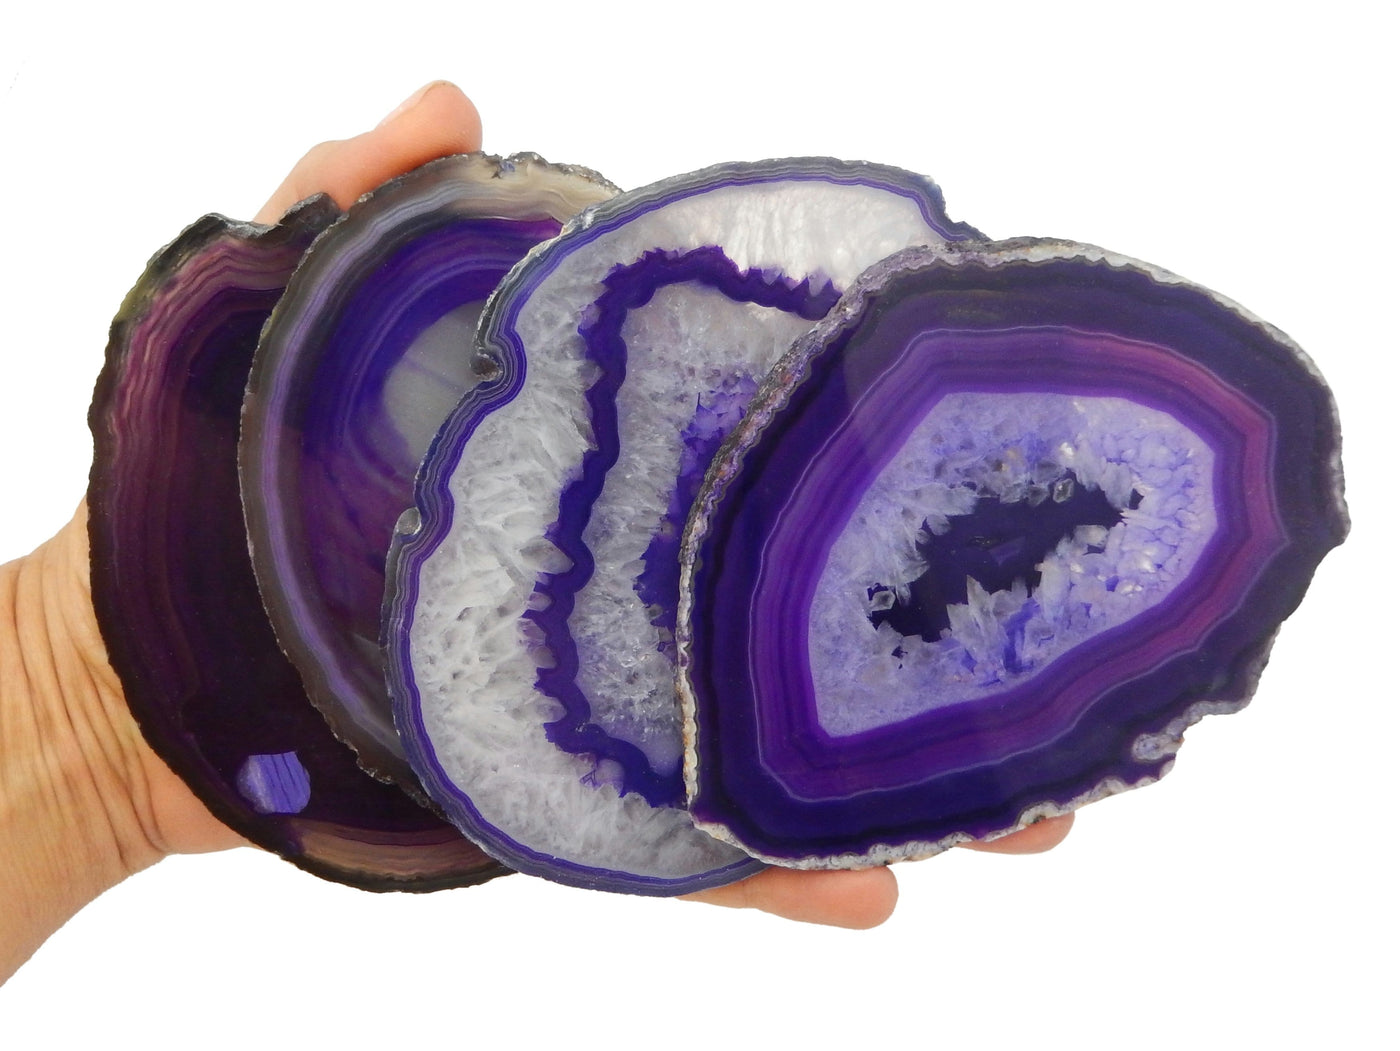 4 Purple Agate Slice - Agate Slices #5 size in a hand for size reference